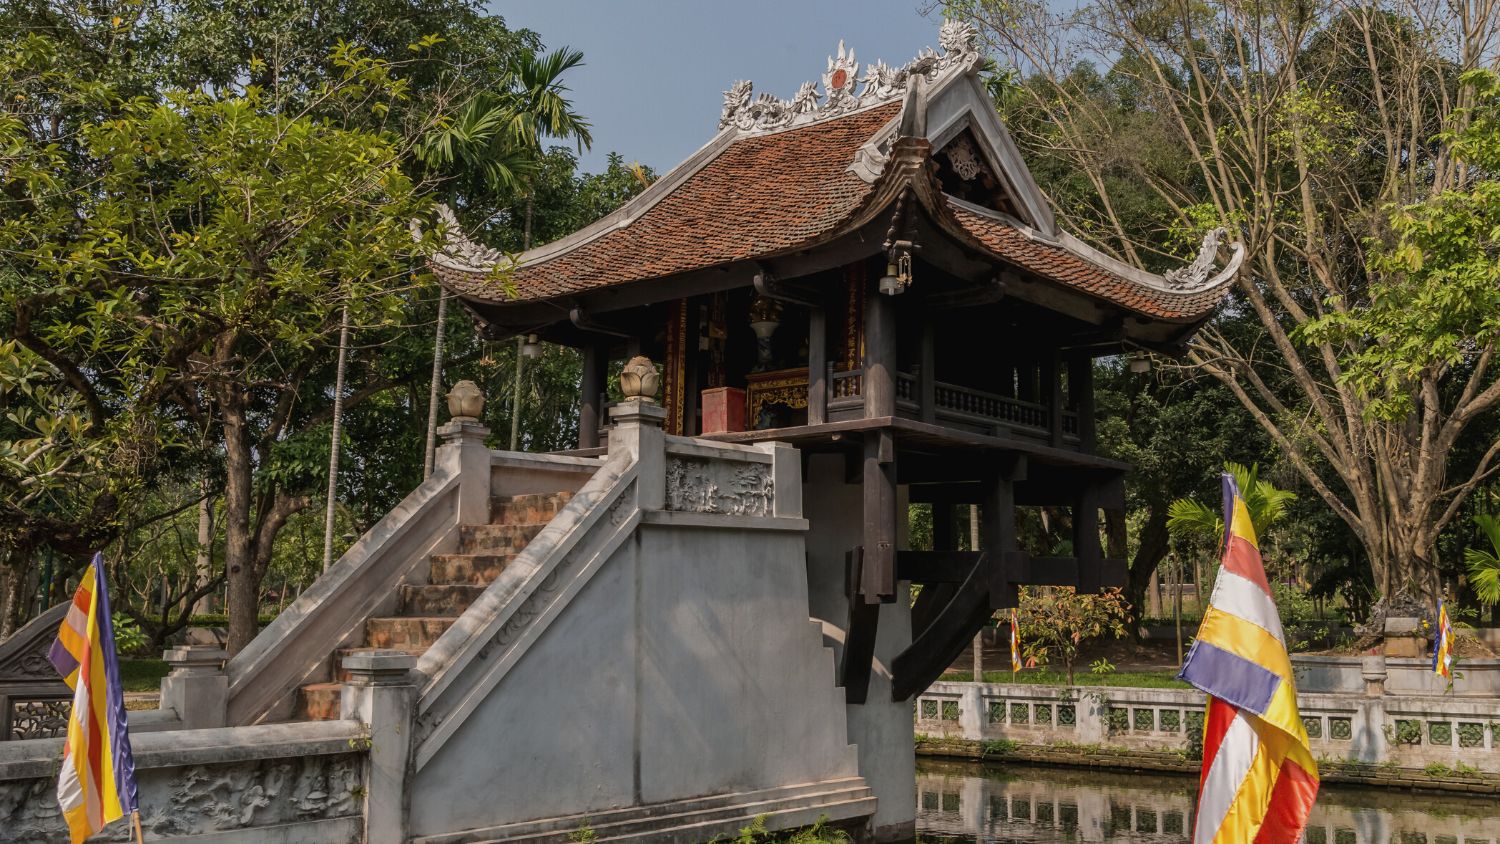  Visit One Pillar Pagoda, One Of Vietnam’s Most Iconic Temples